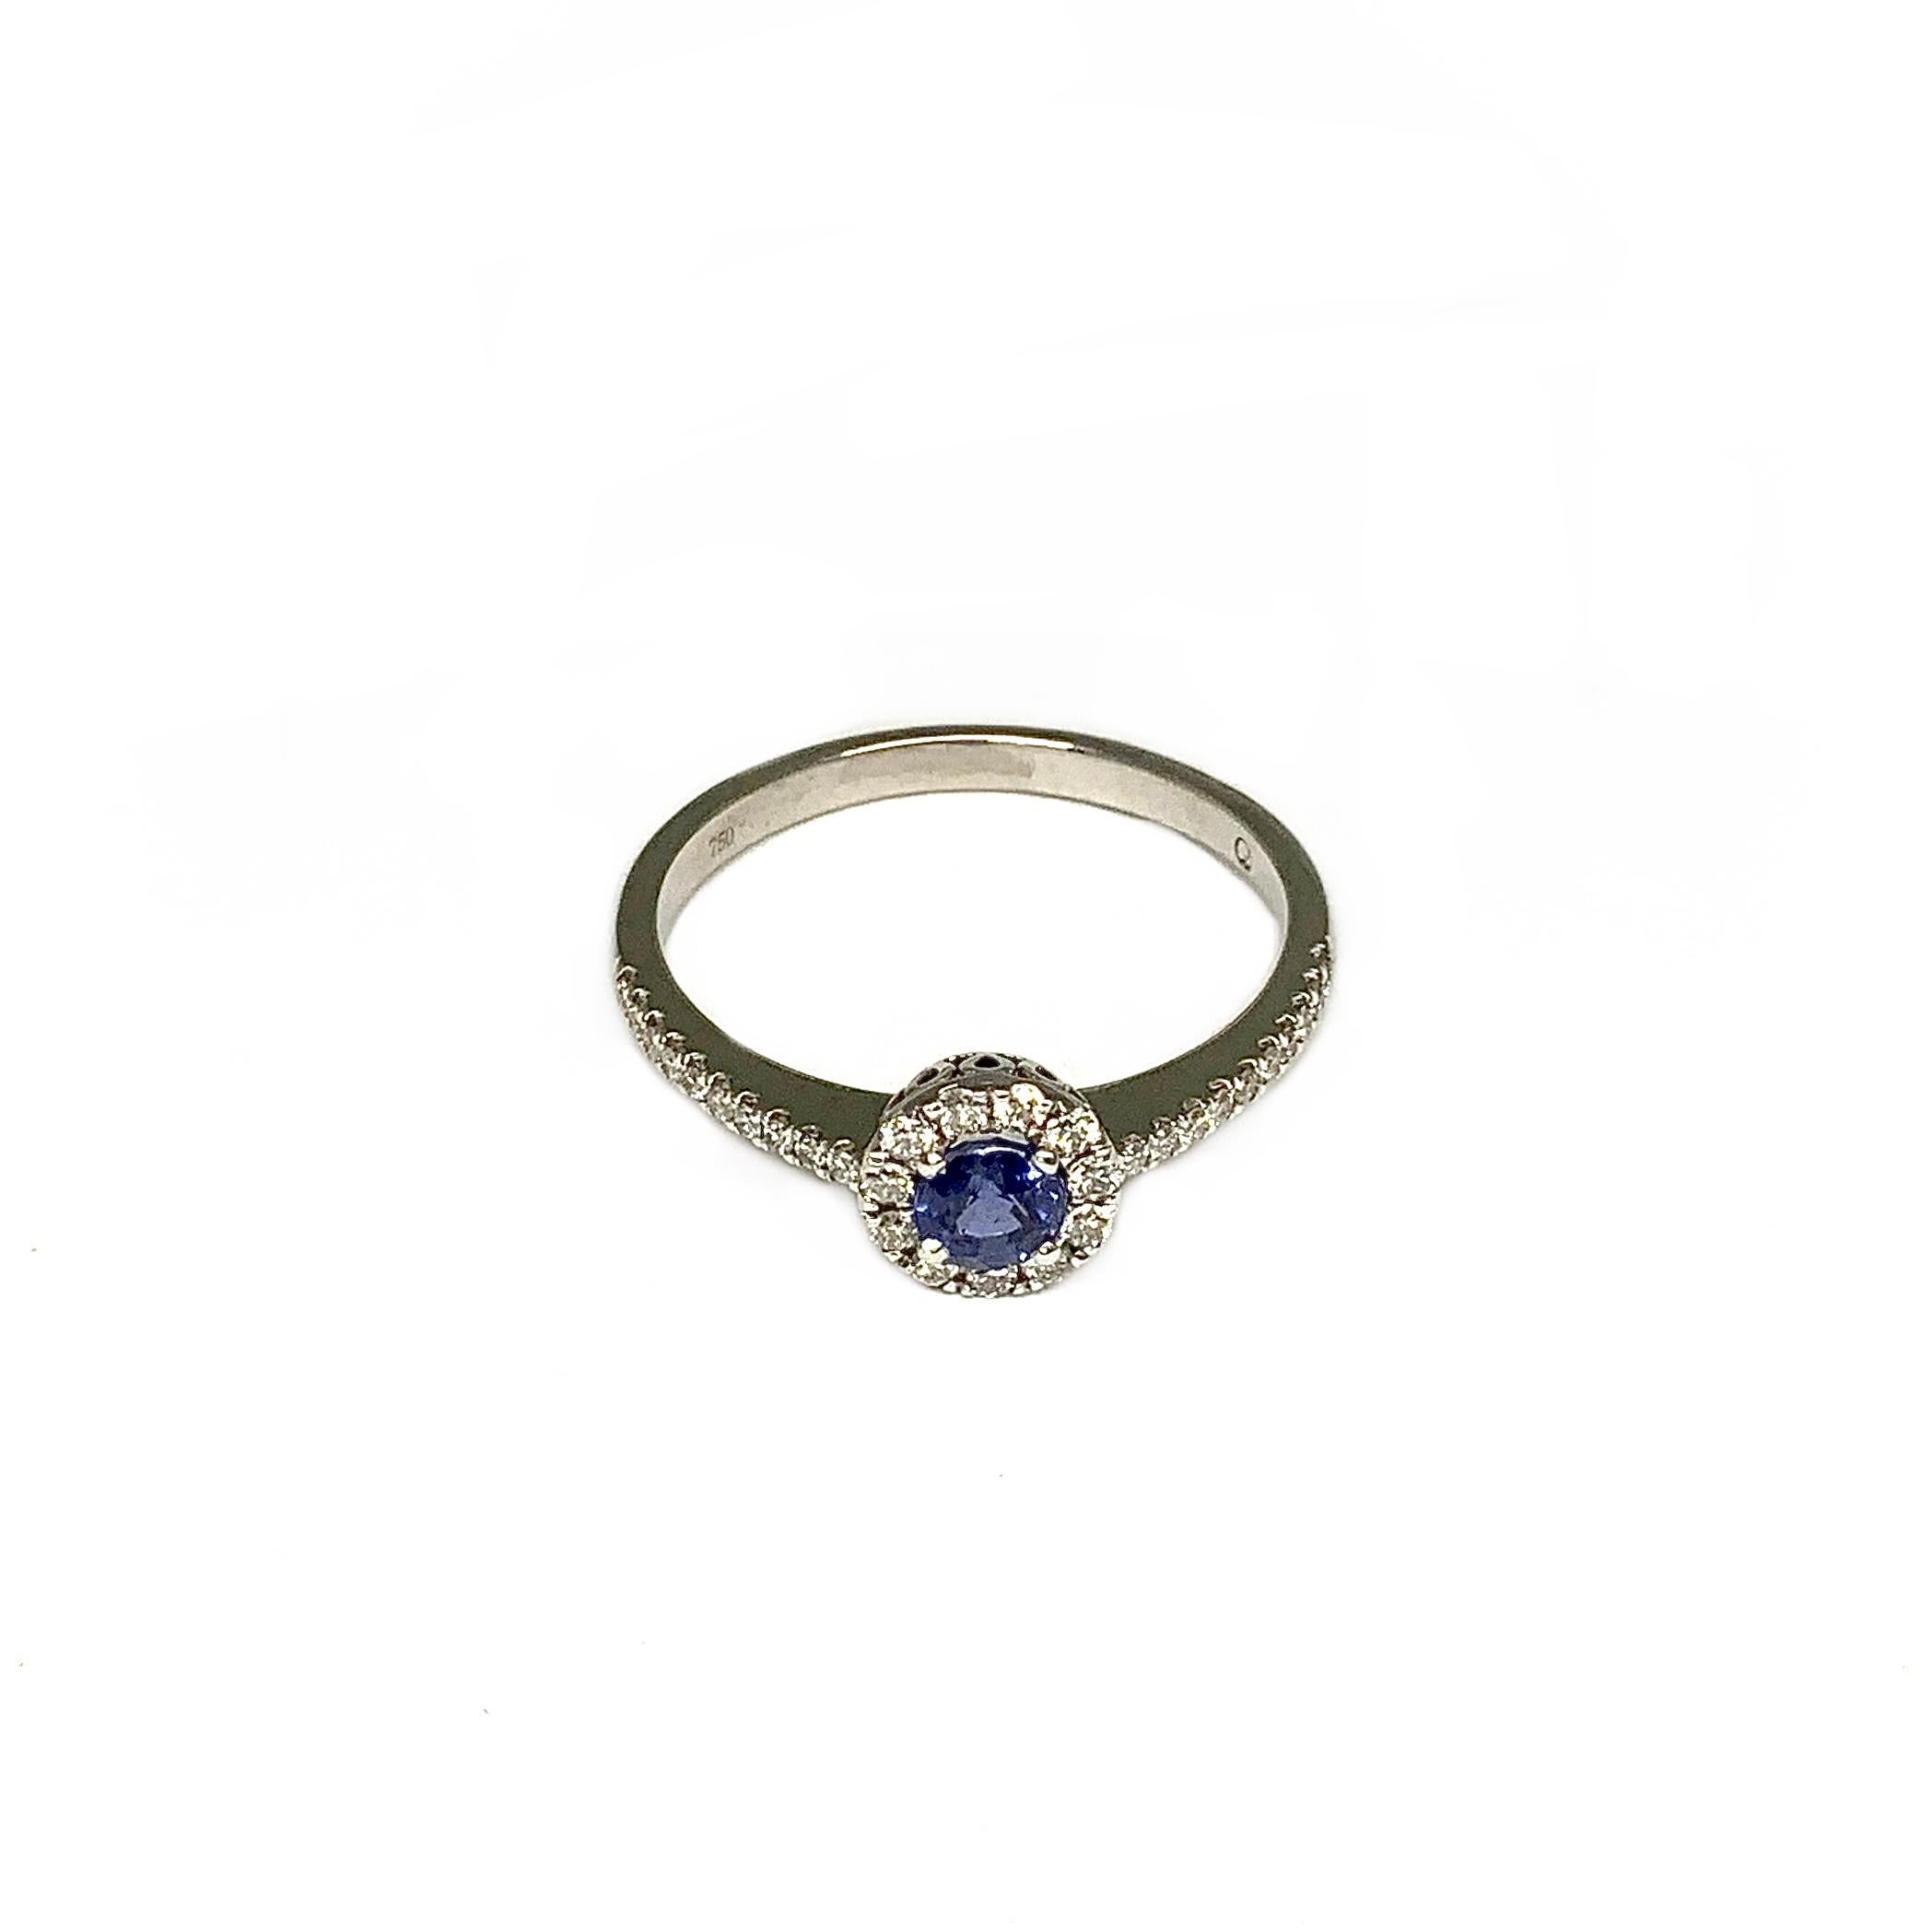 Material: Ring in white gold 750 18K polished width: 1.4mm - 2.0mm height: 1.1mm - 3.0mm with a blue Sapphire in brilliant cut 0.40ct. Ø: 4.0mm height: 3.0mm with 31 white Diamonds, 0.22ct. TWsi
Ring size: 56

Embrace the allure of eternal beauty